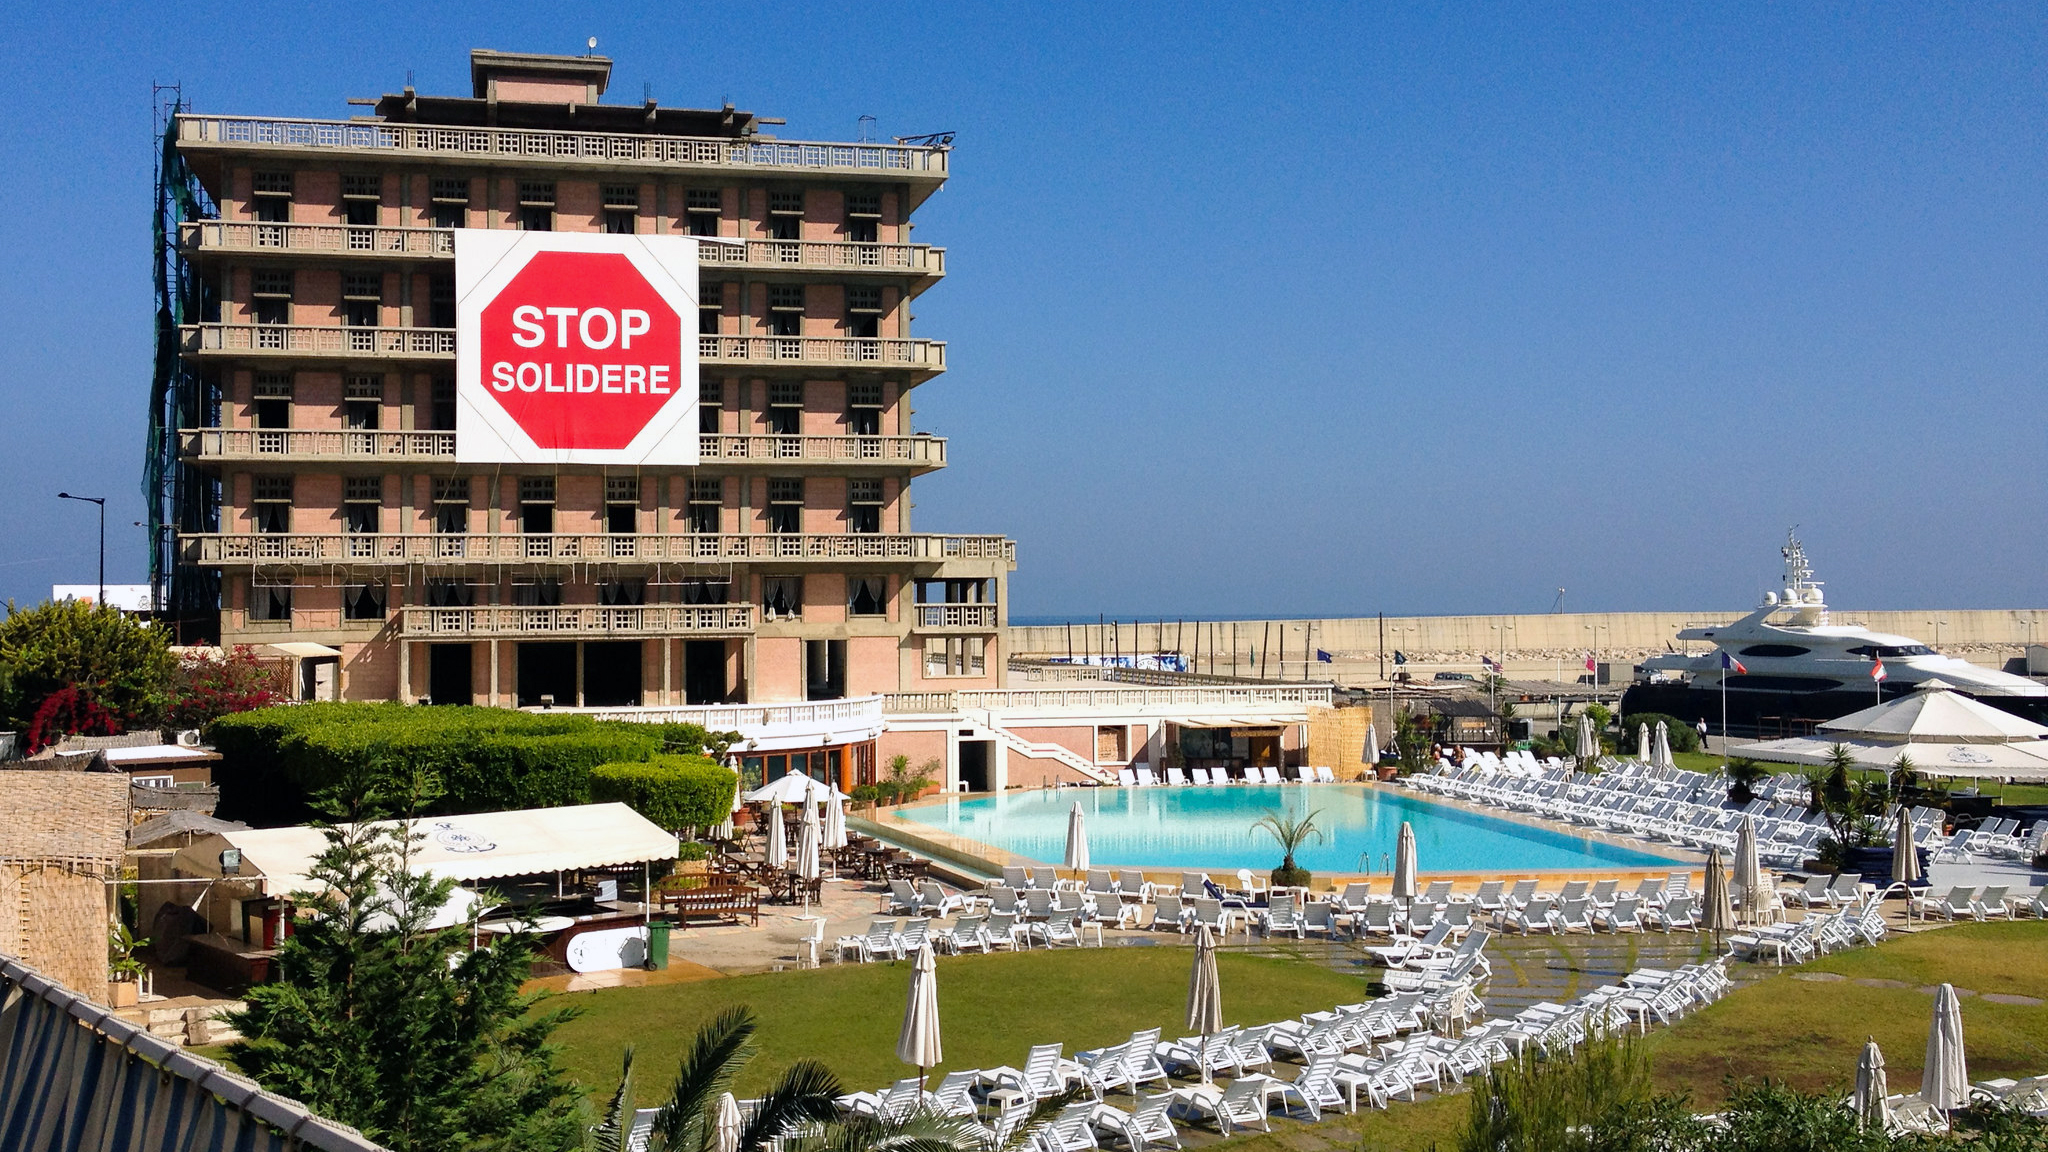 A giant "Stop Solidere" sign drapes over the St. Georges Hotel for all to see. (Allan Leonard)